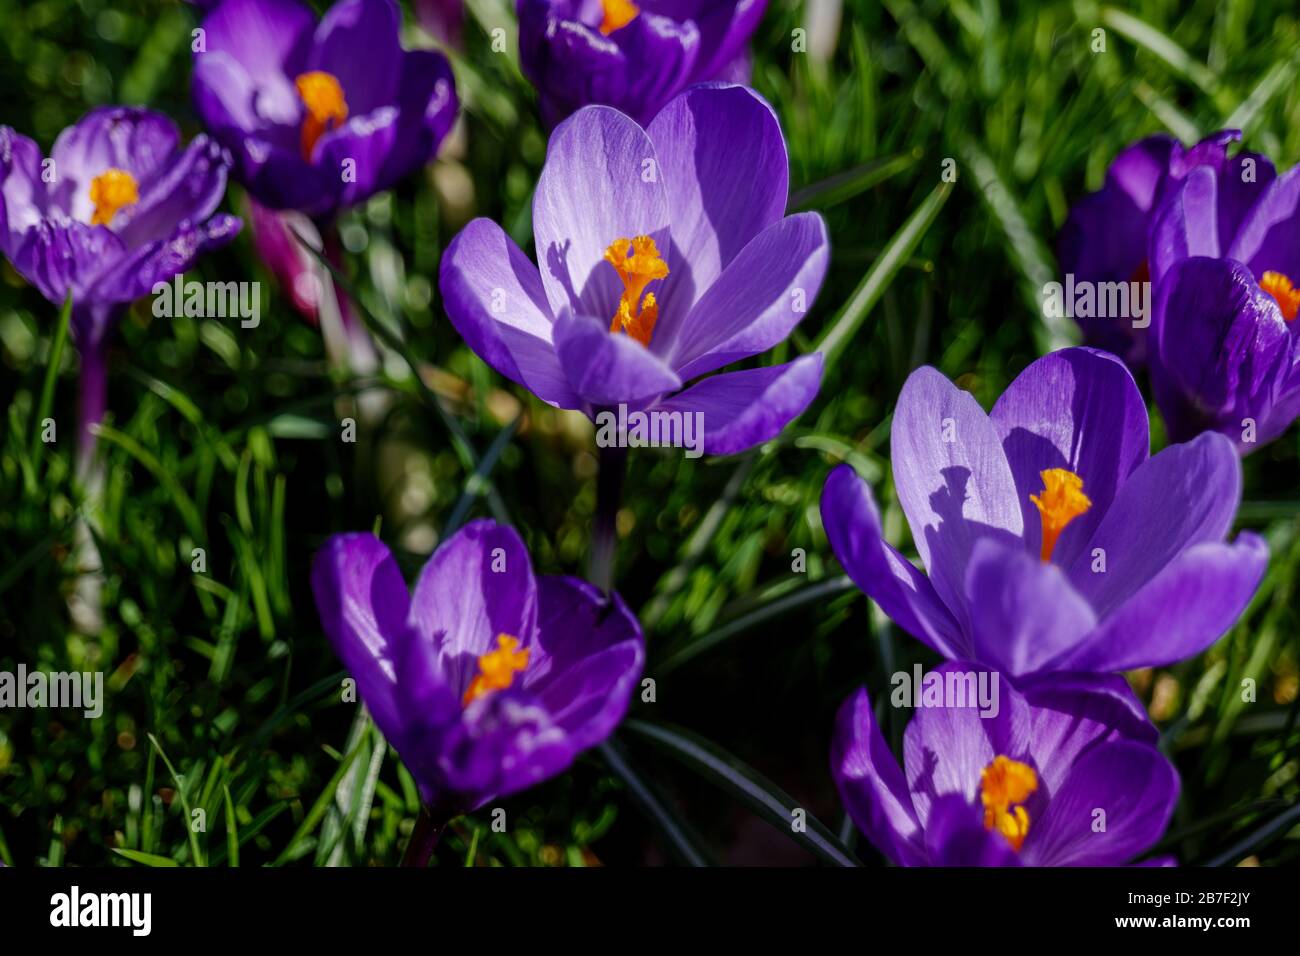 Moody dark tone, Close up and macro view at pollen and petals of blooming Blue Purple Crocus flowers. Stock Photo